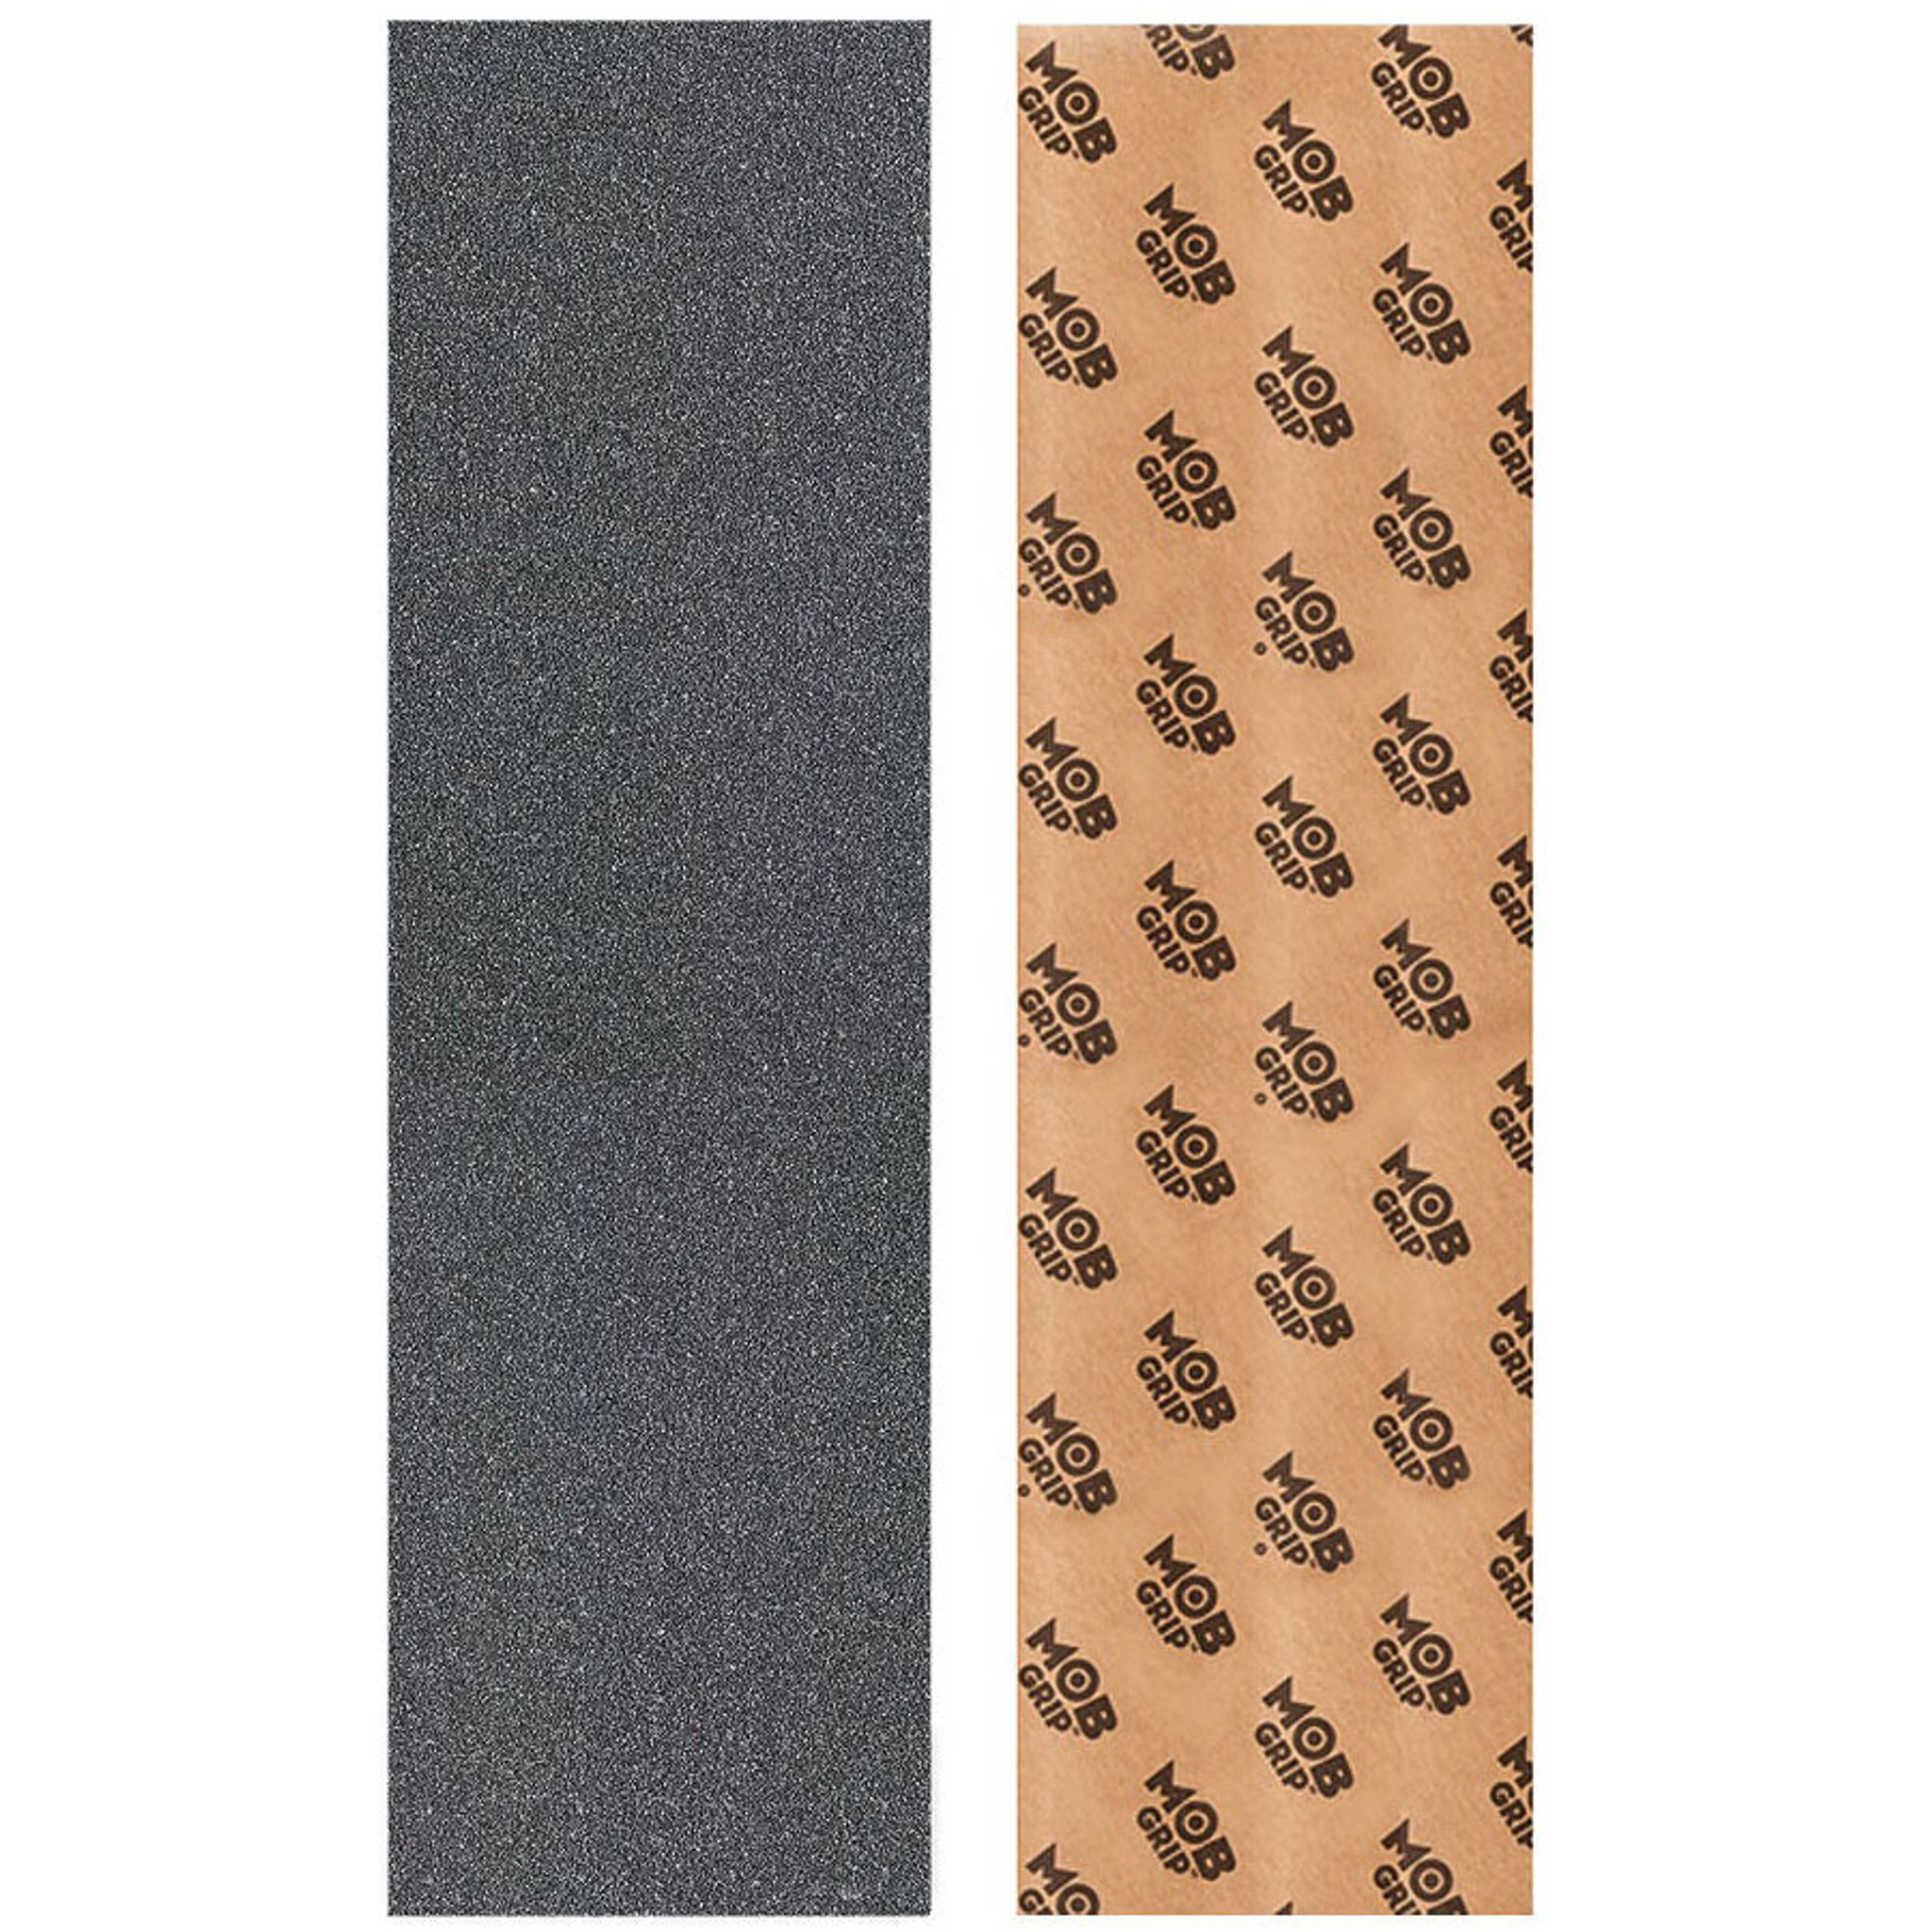 Mob Wave Griptape 9 x 33 Clear - CalStreets BoarderLabs